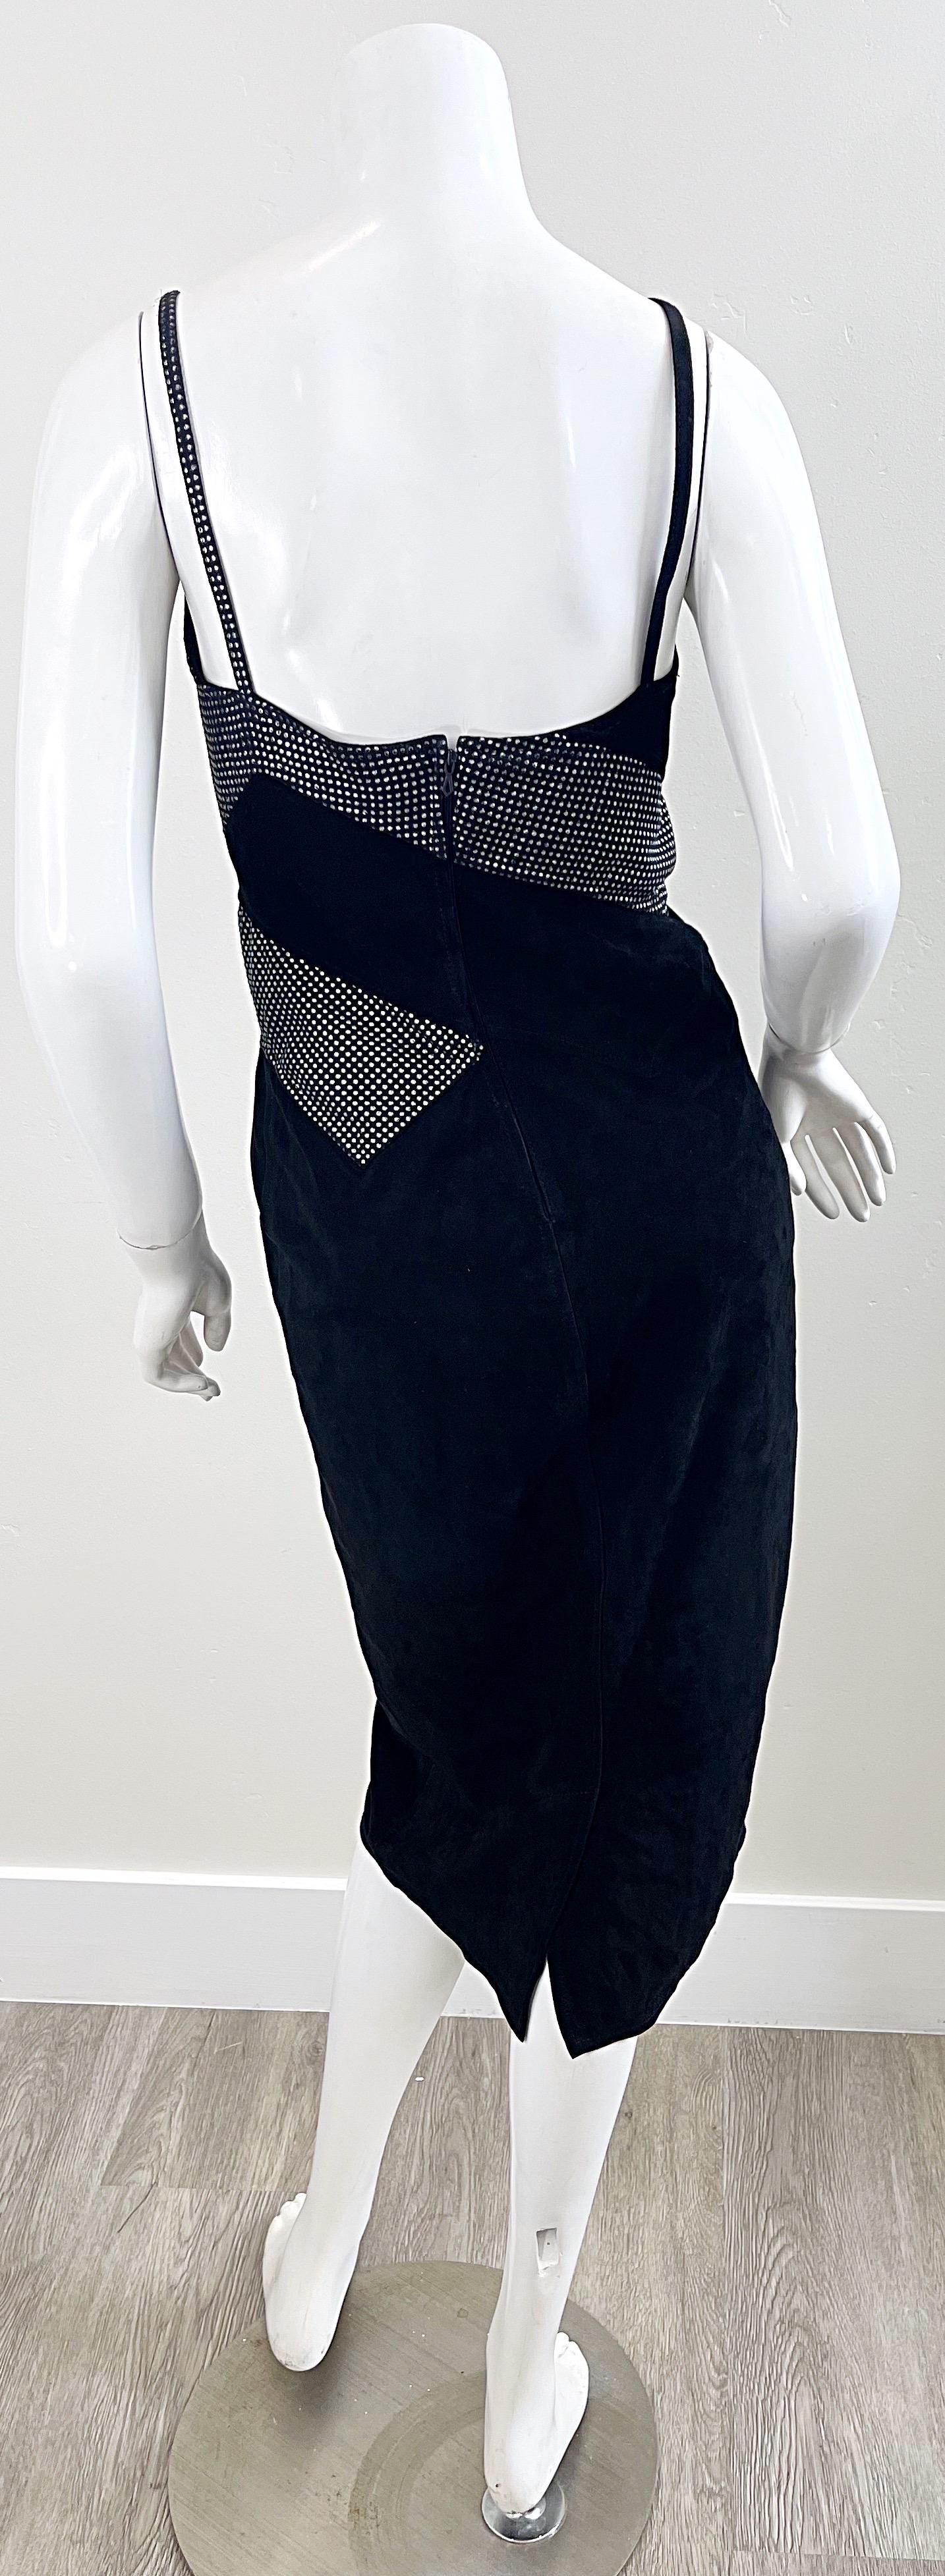 Fendi 1980s Fendissime Black Silver Suede Leather Vintage 80s Hand Painted Dress For Sale 2